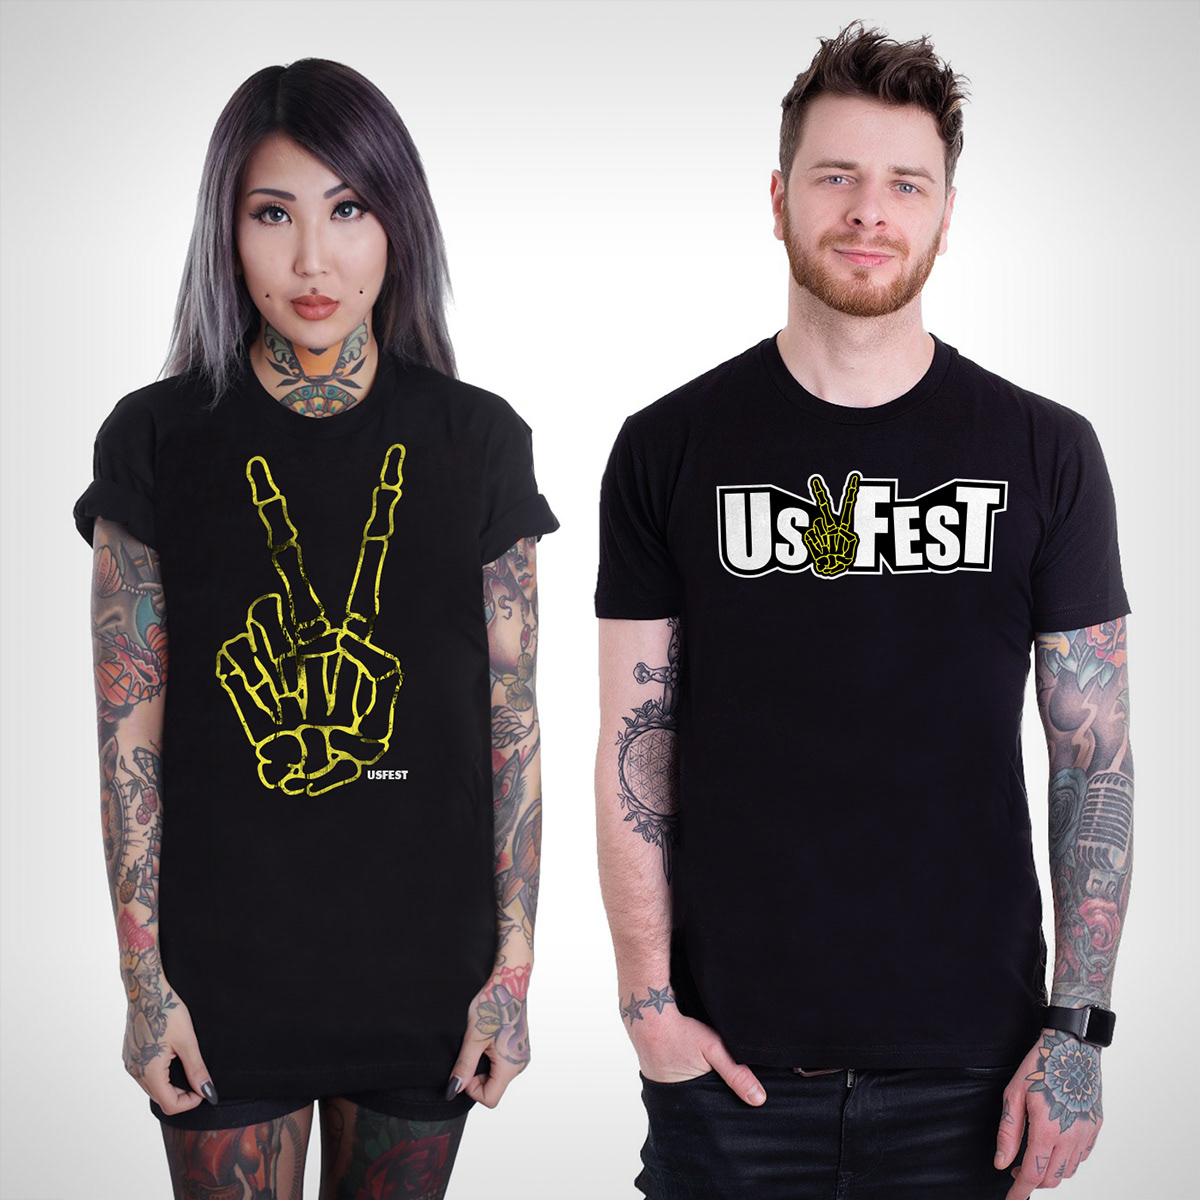 UsFest punk gig poster alternative music music Character design  neon sydney equality rock music